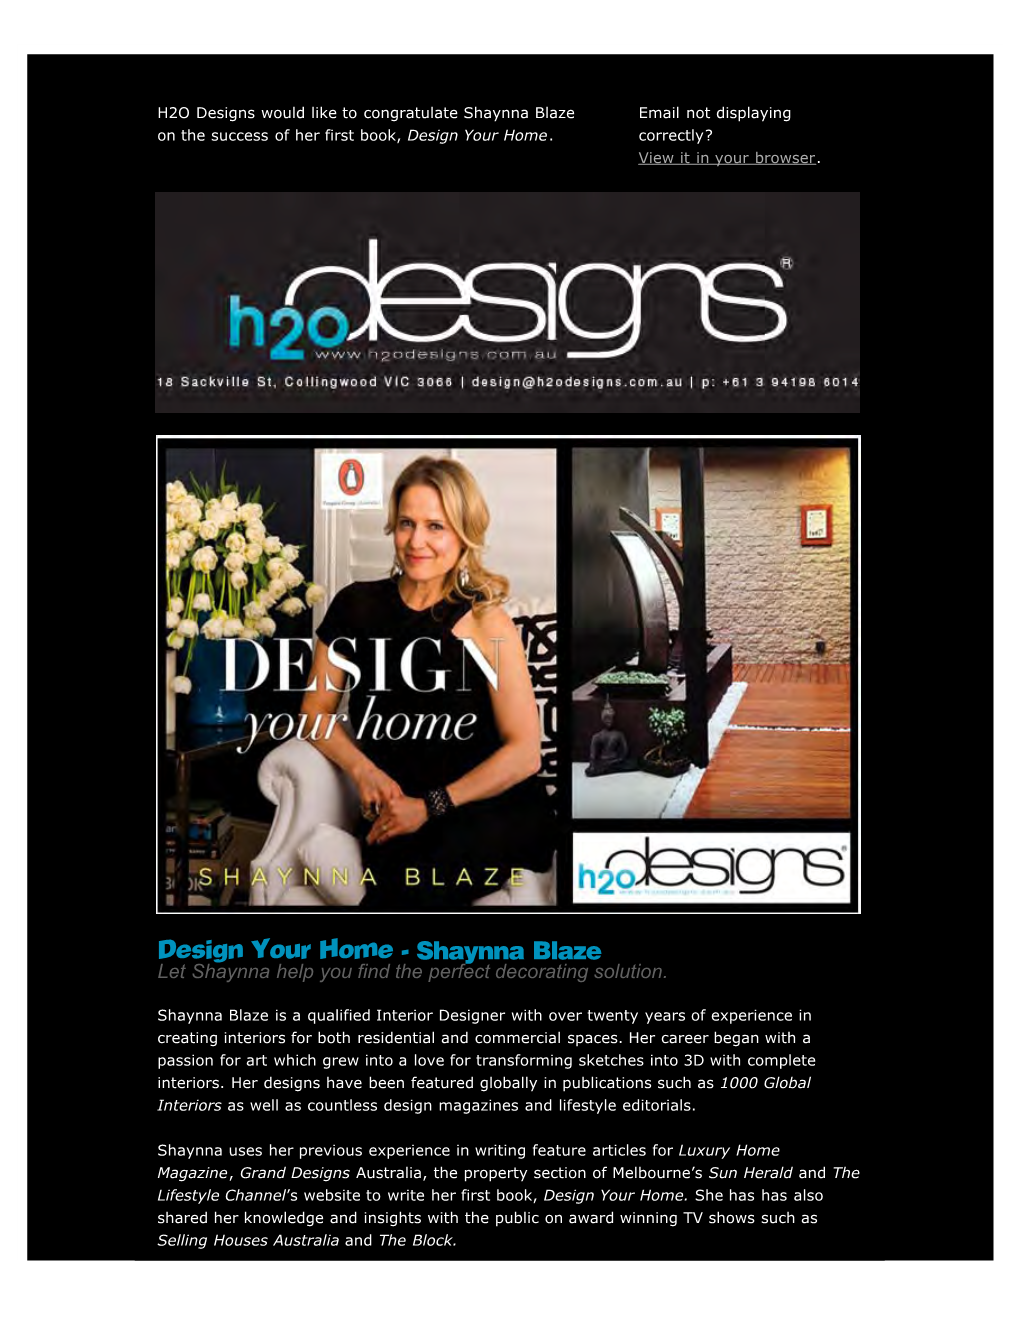 Shaynna Blaze Email Not Displaying on the Success of Her First Book, Design Your Home